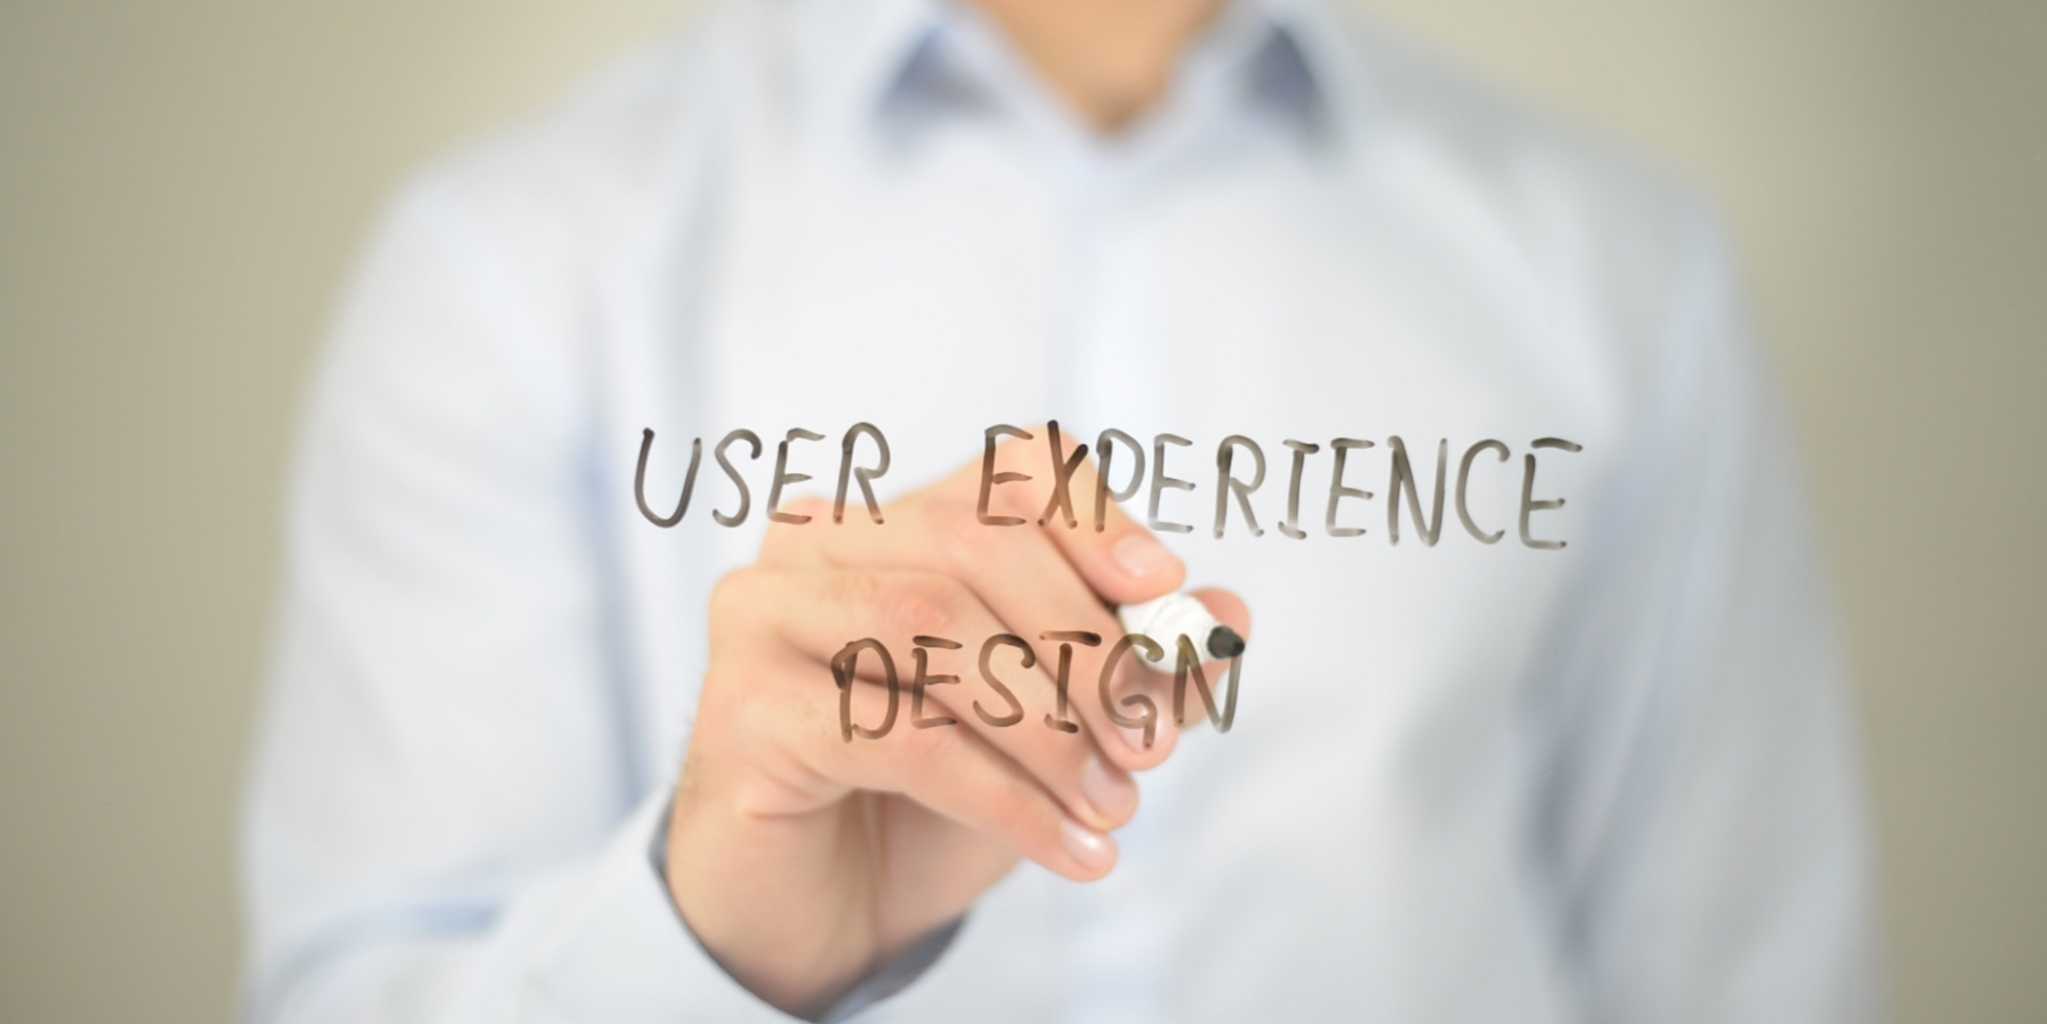 "USER EXPERIENCE DESIGN" written on glass with a dry erase marker.